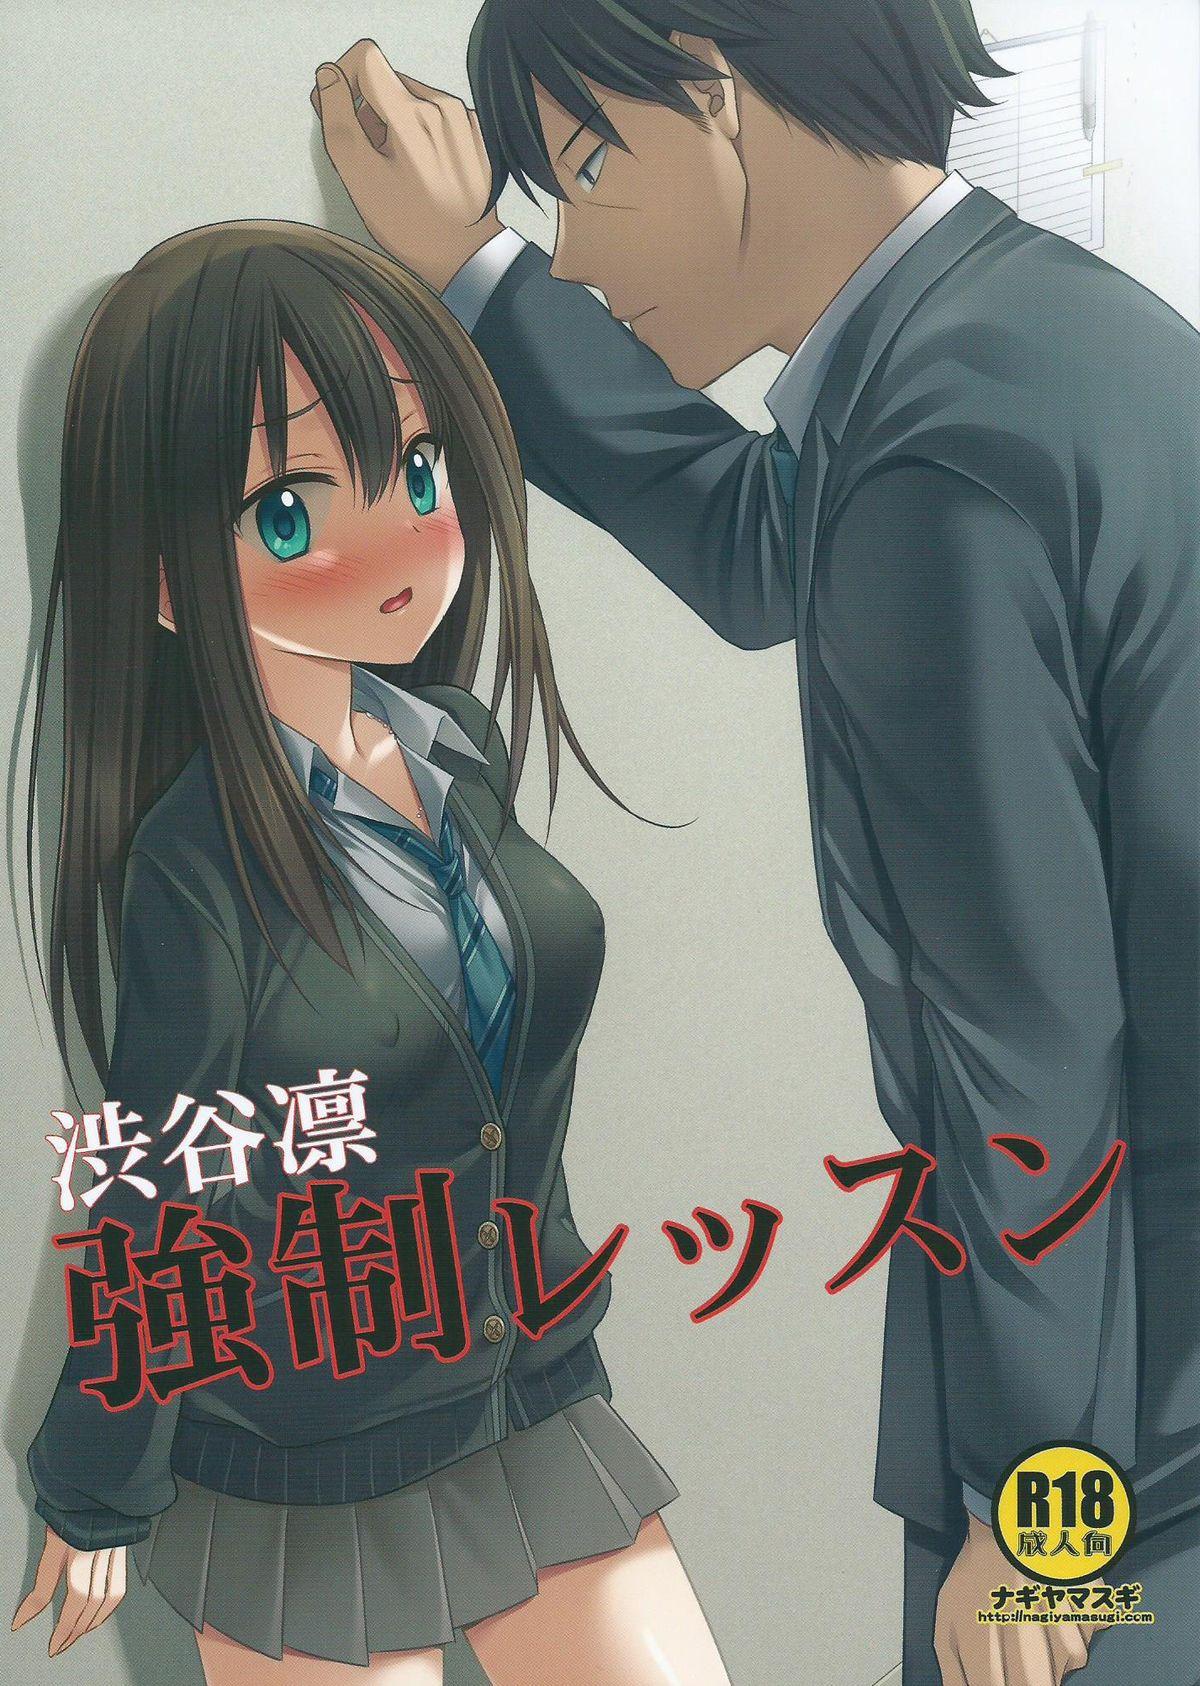 Stepsiblings Shibuya Rin Kyousei Lesson - The idolmaster Caught - Picture 1